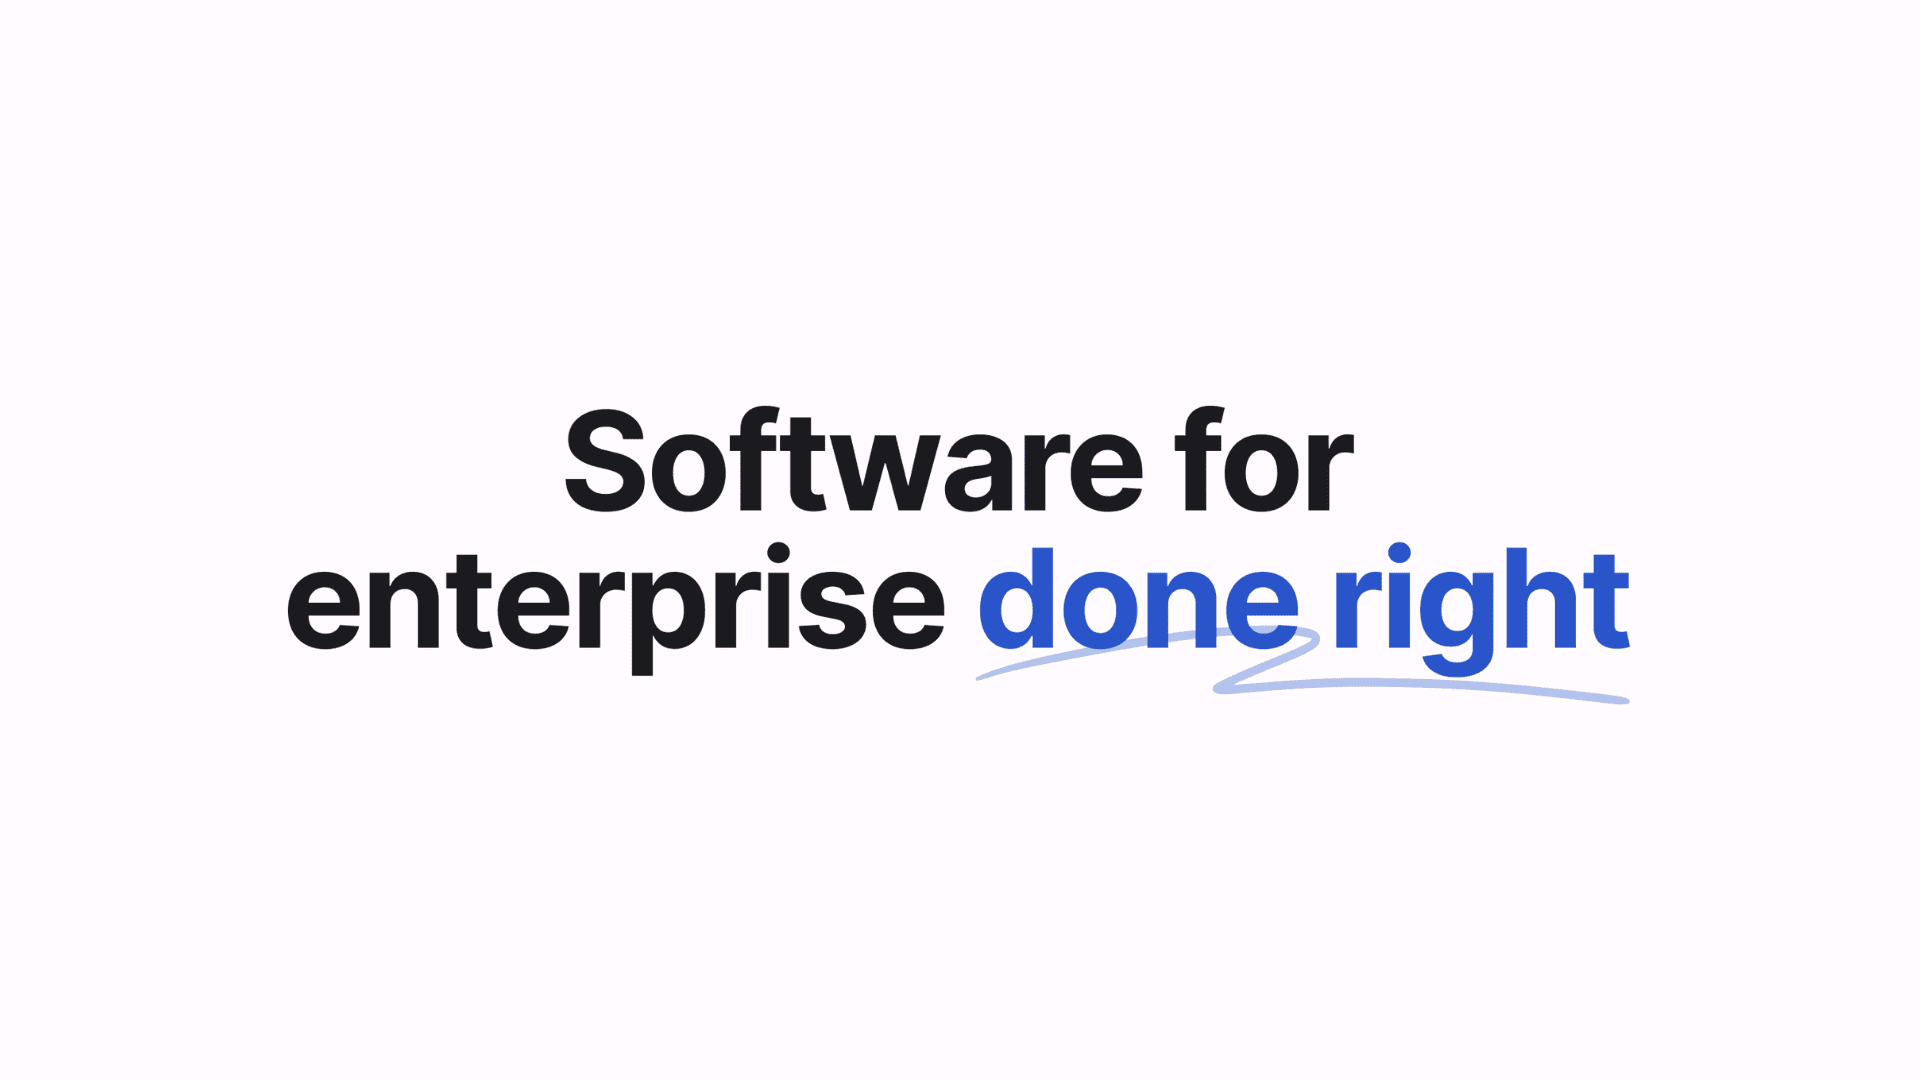 Text reading "Software for enterprise done right"